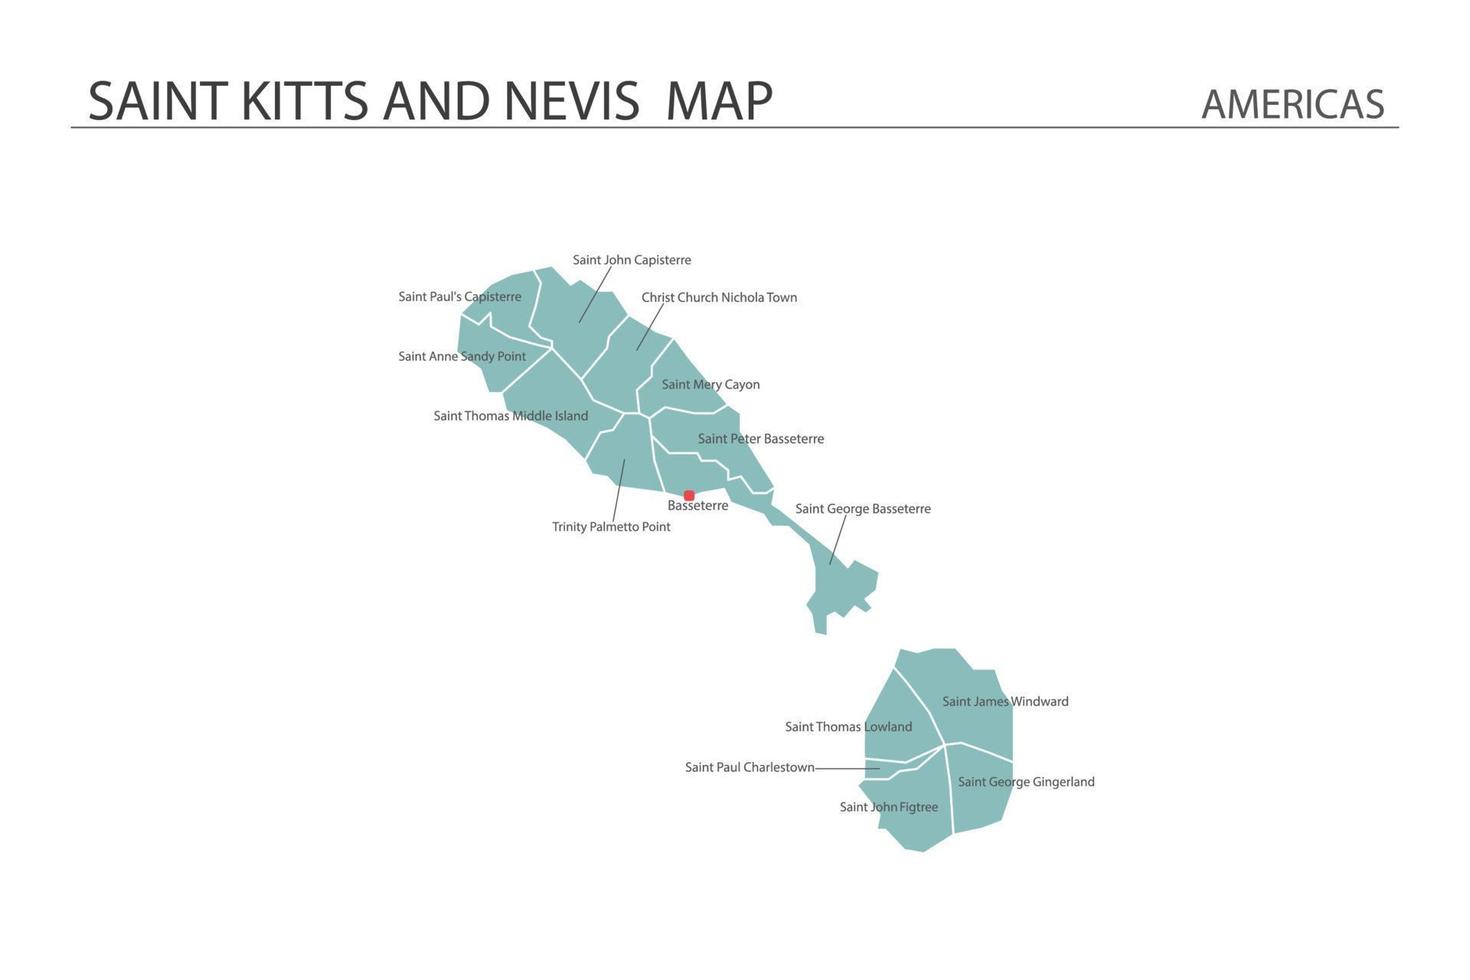 Saint Kitts and Nevis map vector on white background. Map have all province and mark the capital city of Saint Kitts and Nevis.